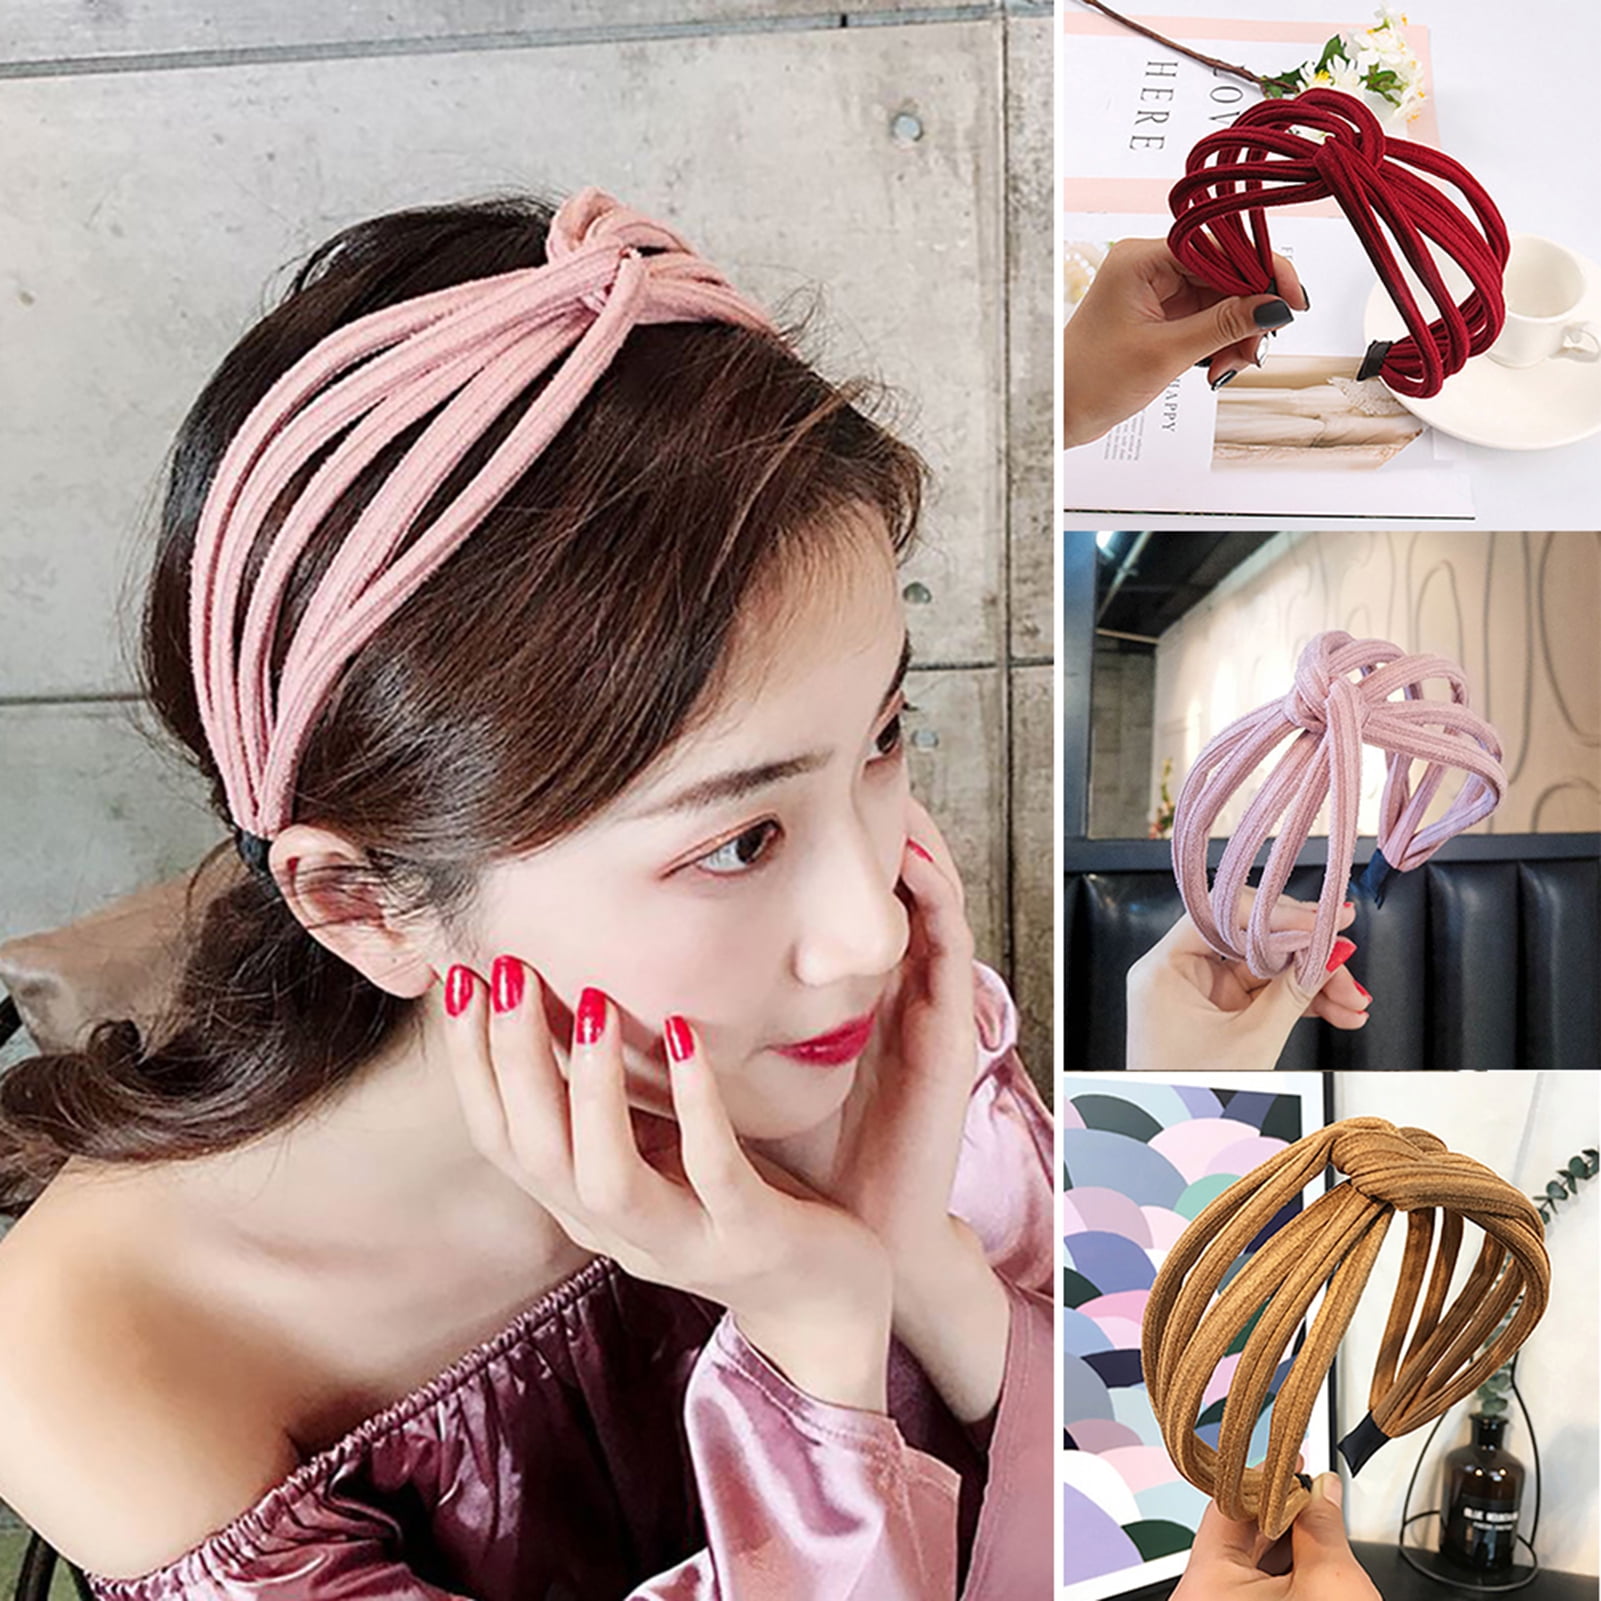 GROFRY 5 Pcs Headband Comfortable to wear Anti-slip Cloth Hair Band  Accessories for Women 